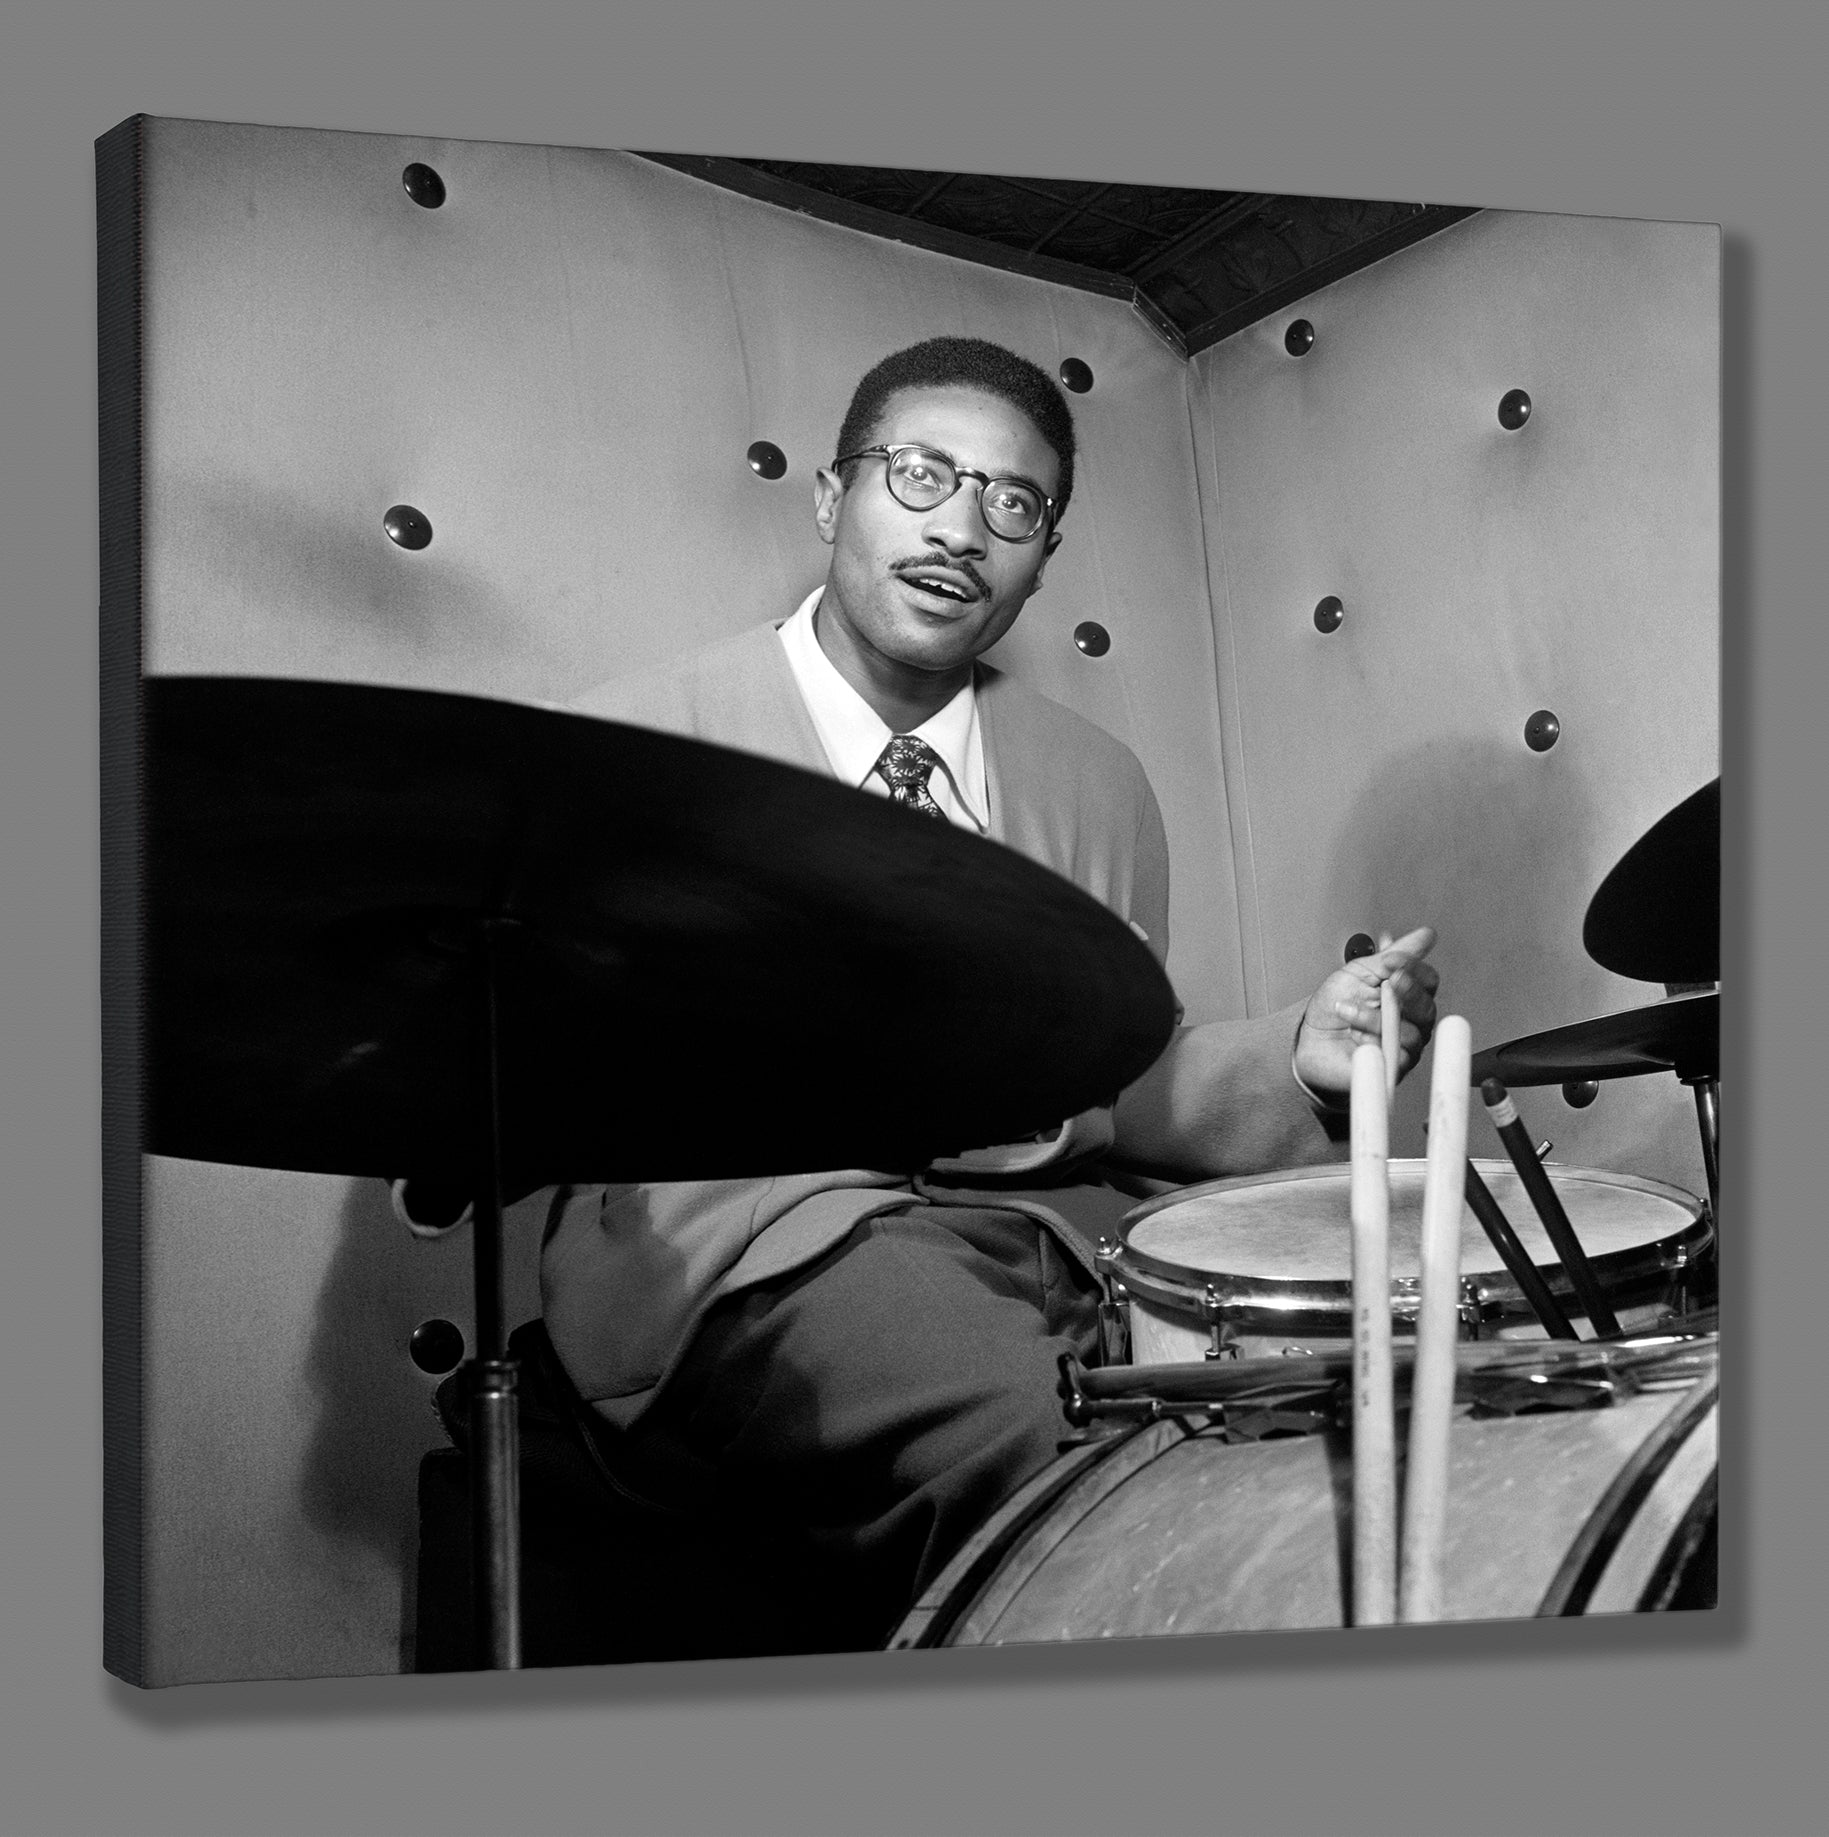 A mockup canvas print of a vintage image of Max Roach